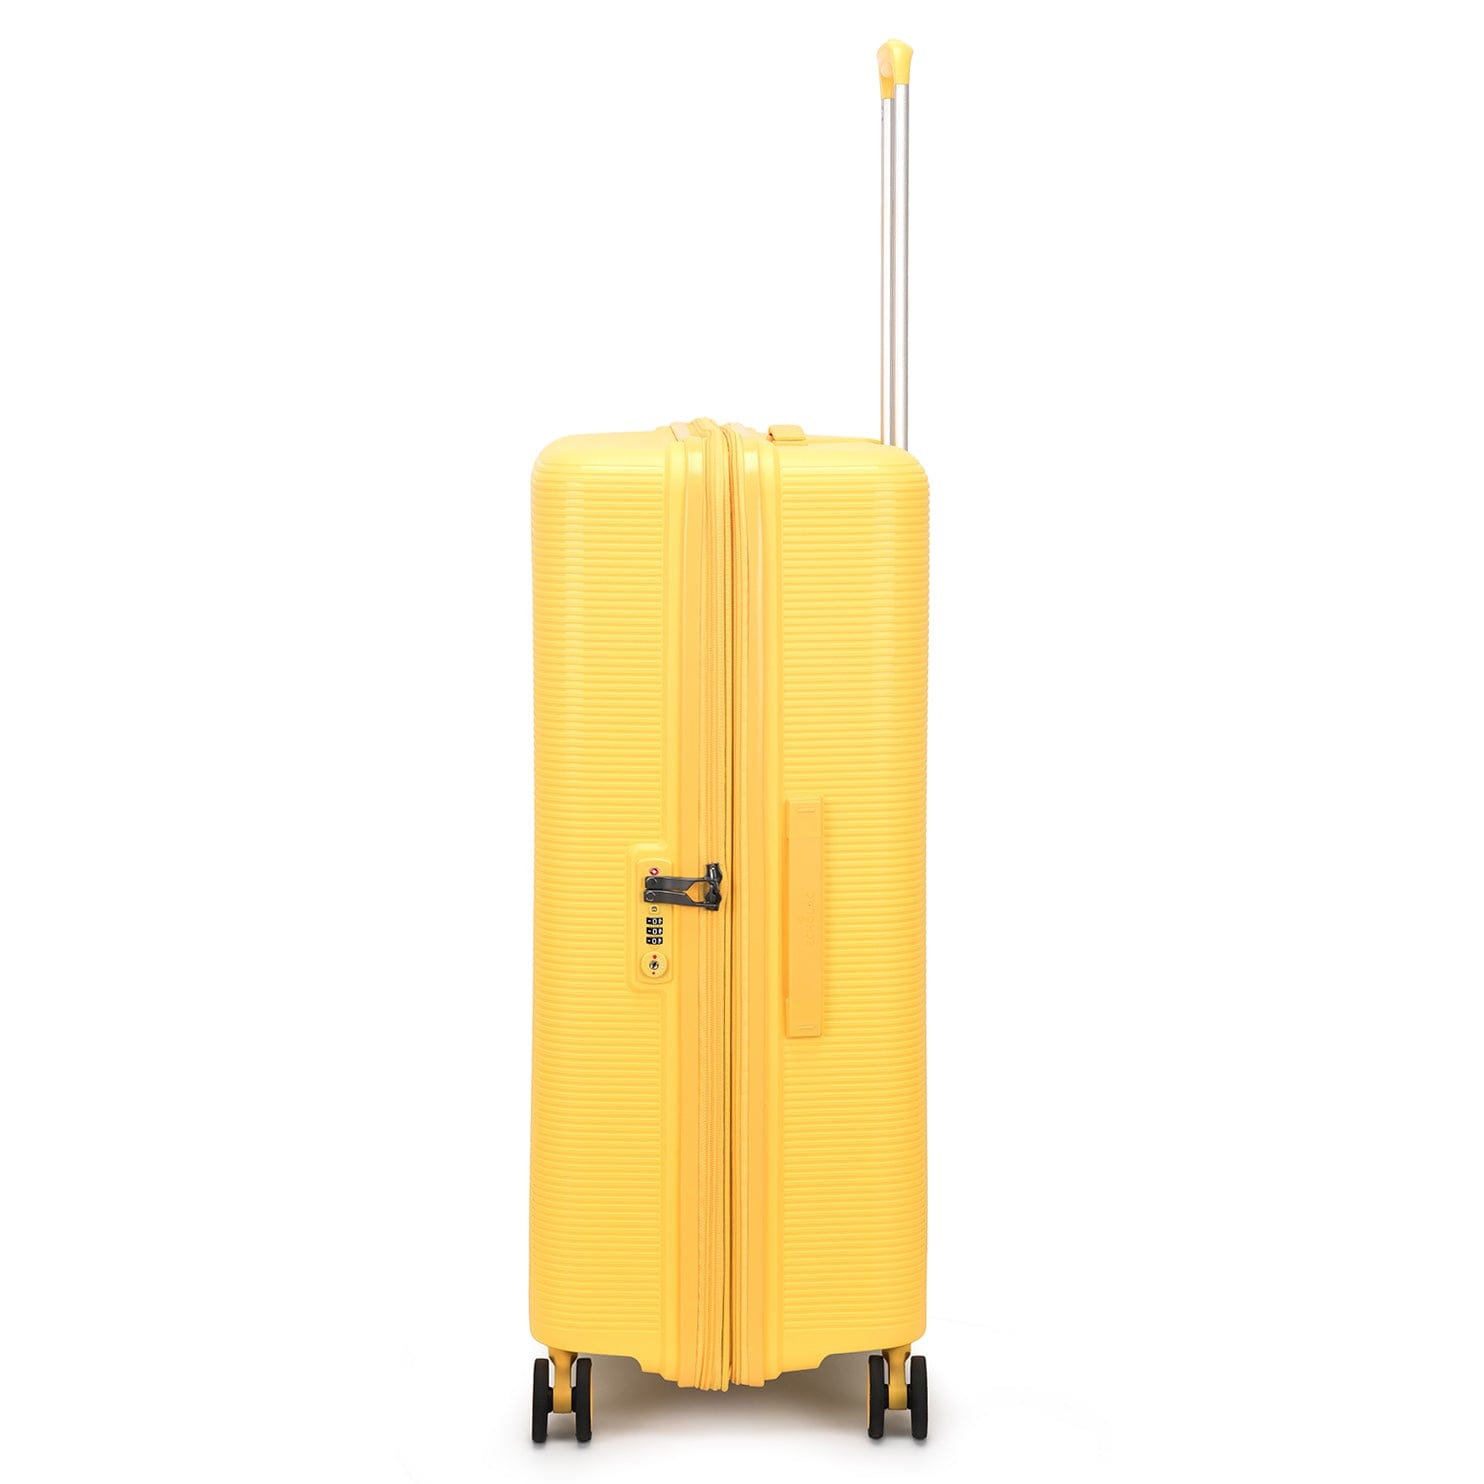 Echolac Forza 55+65+75cm Hardcase 4 Double Wheel Expandable Cabin & Check-In Luggage Trolley Set Mango Yellow